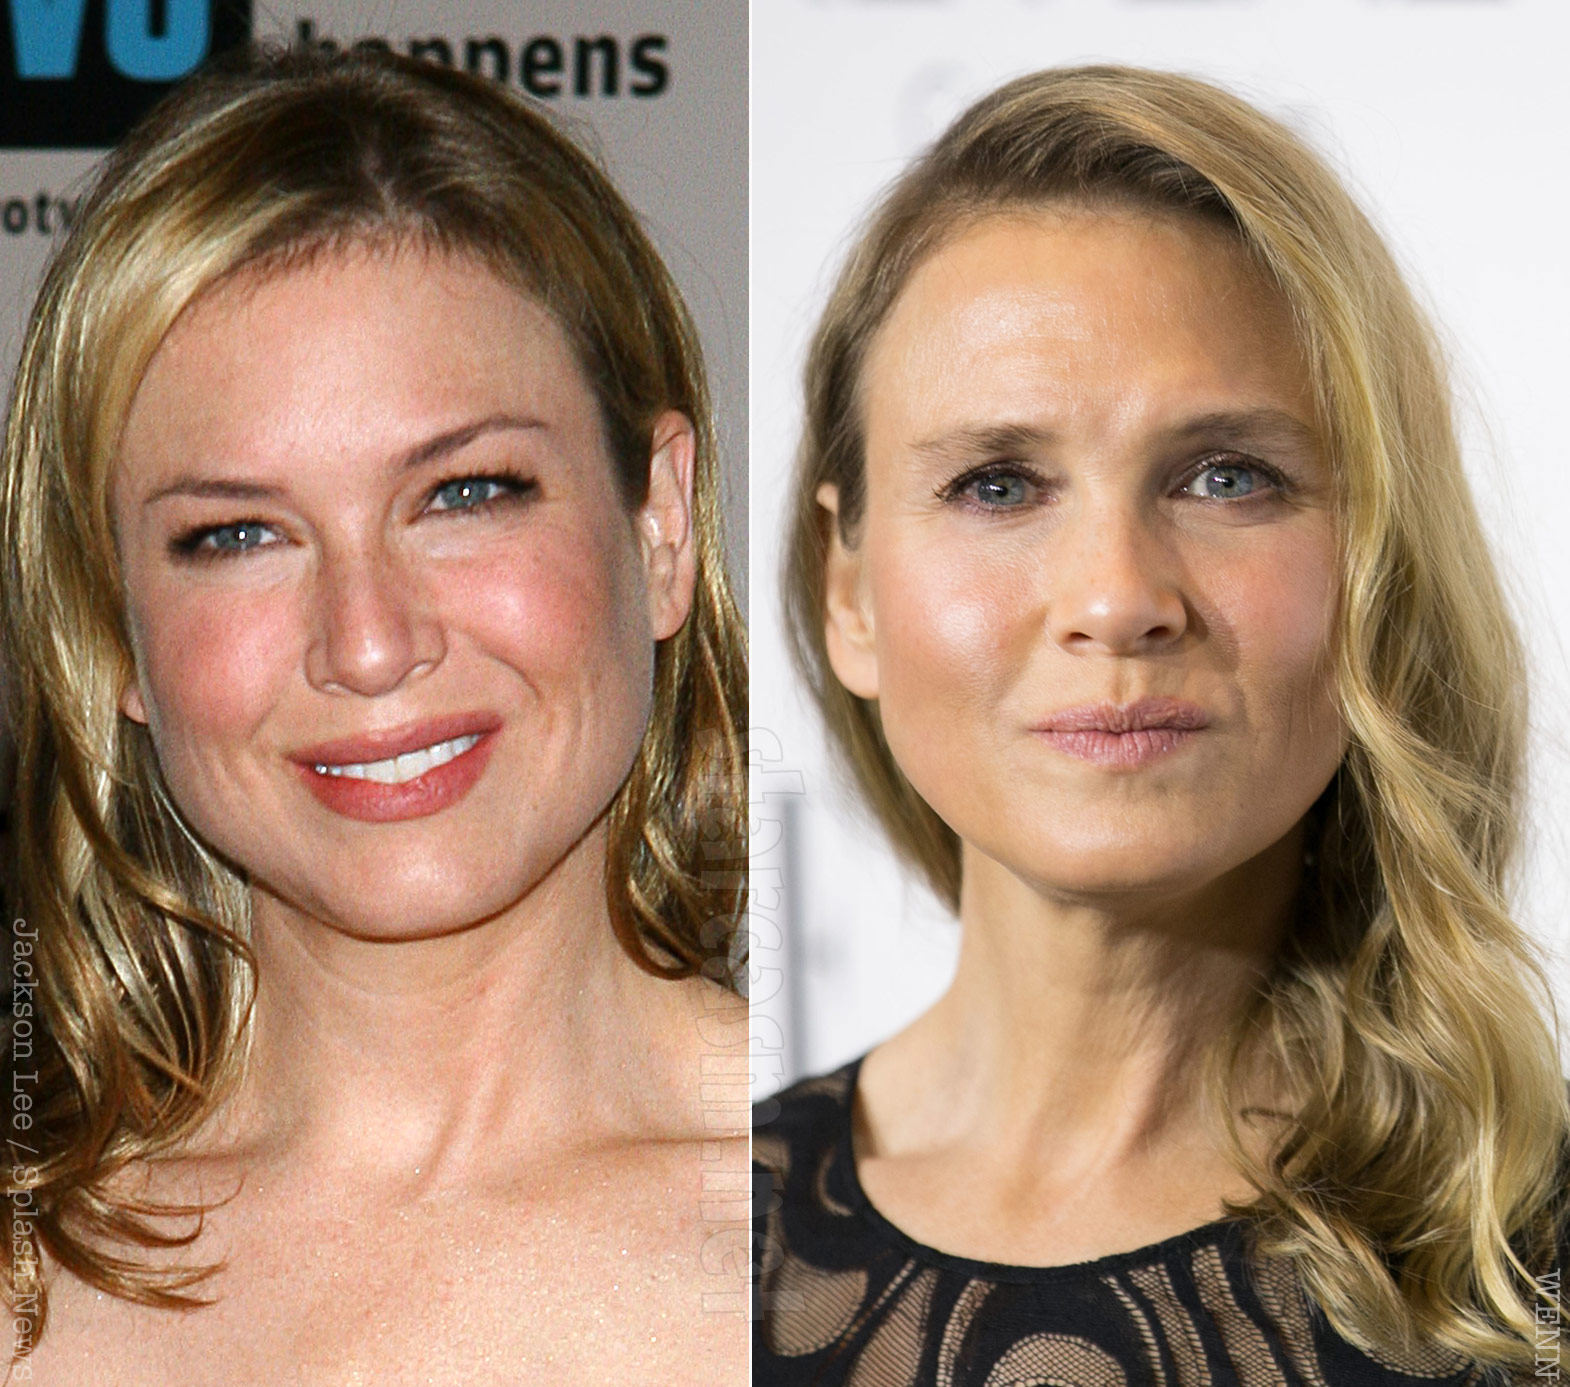 What happened to Renee Zellweger's face? Has she had plastic sugery?